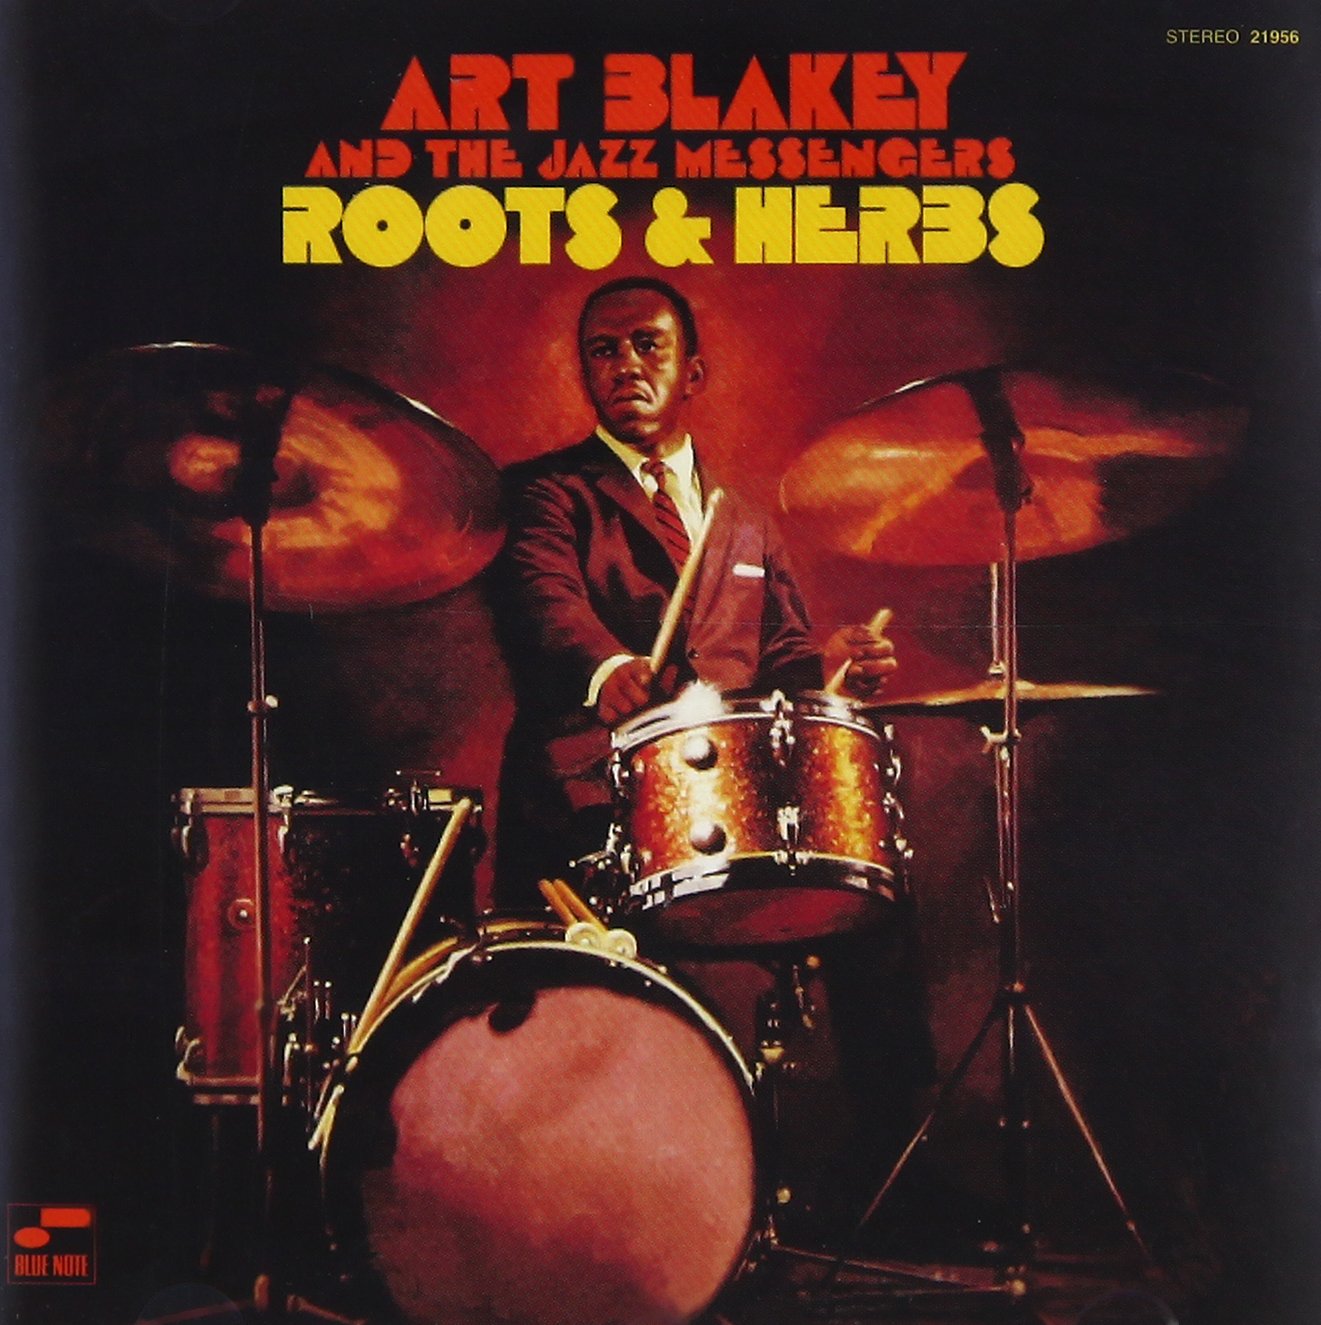 Art Blakey and the Jazz Messengers "Roots & Herbs" [All Analog 180g Reissue Vinyl][Blue Note Tone Poet Series]